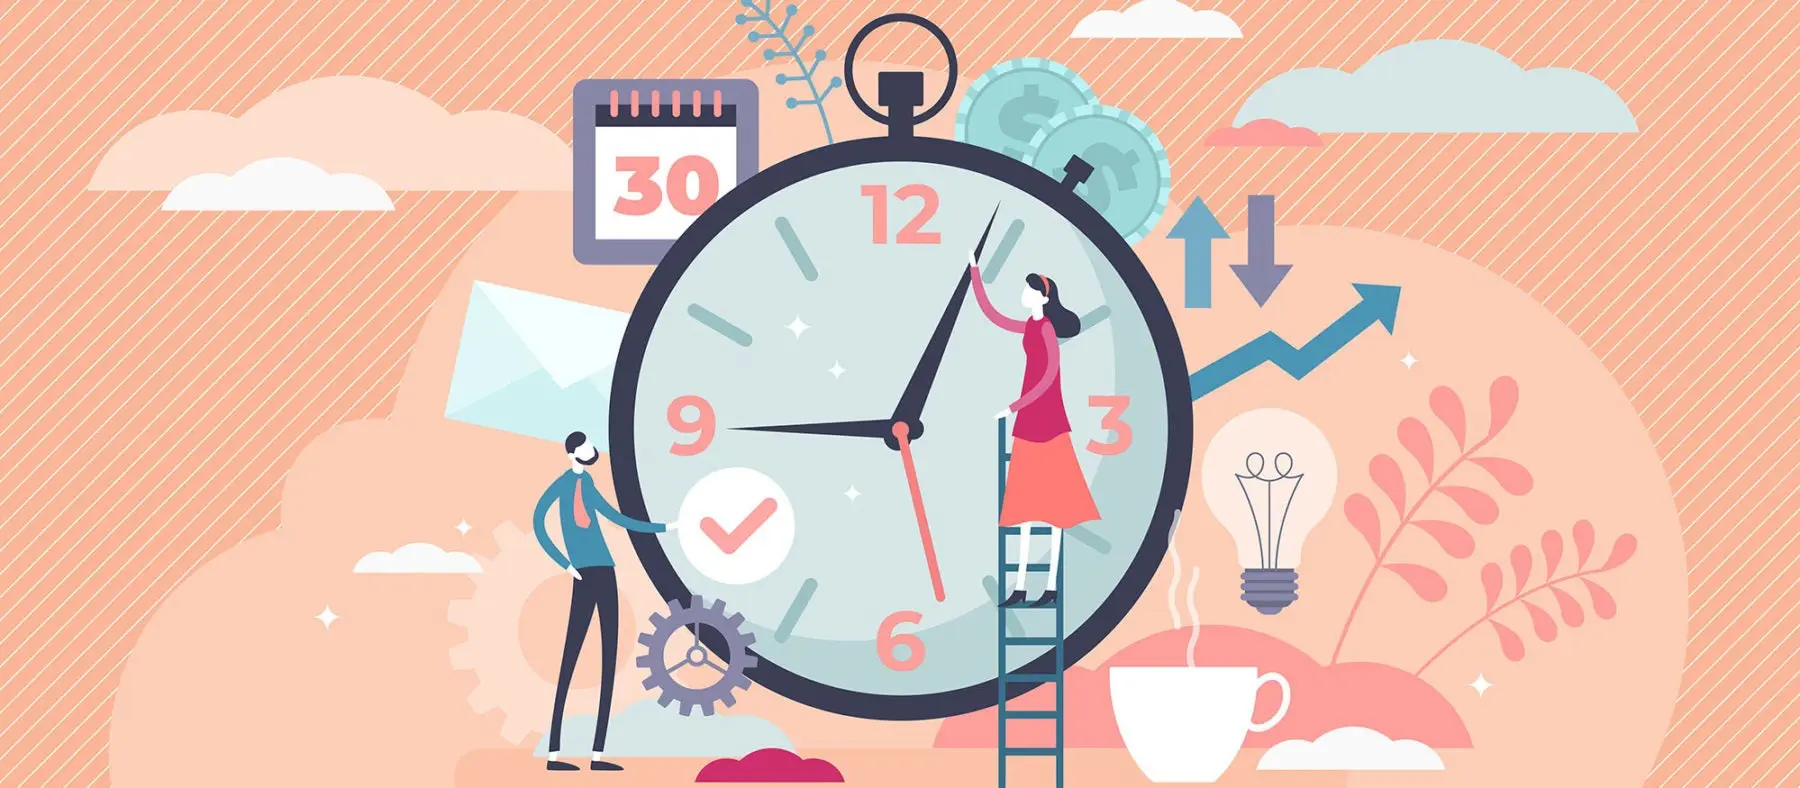 Digitally illustrated graphic featuring a clock. Women on a ladder holding a clock hand and man on the left side looking at the clock. Background features a pink background with a calendar, arrows to show growth, light bulb and coffee cup.